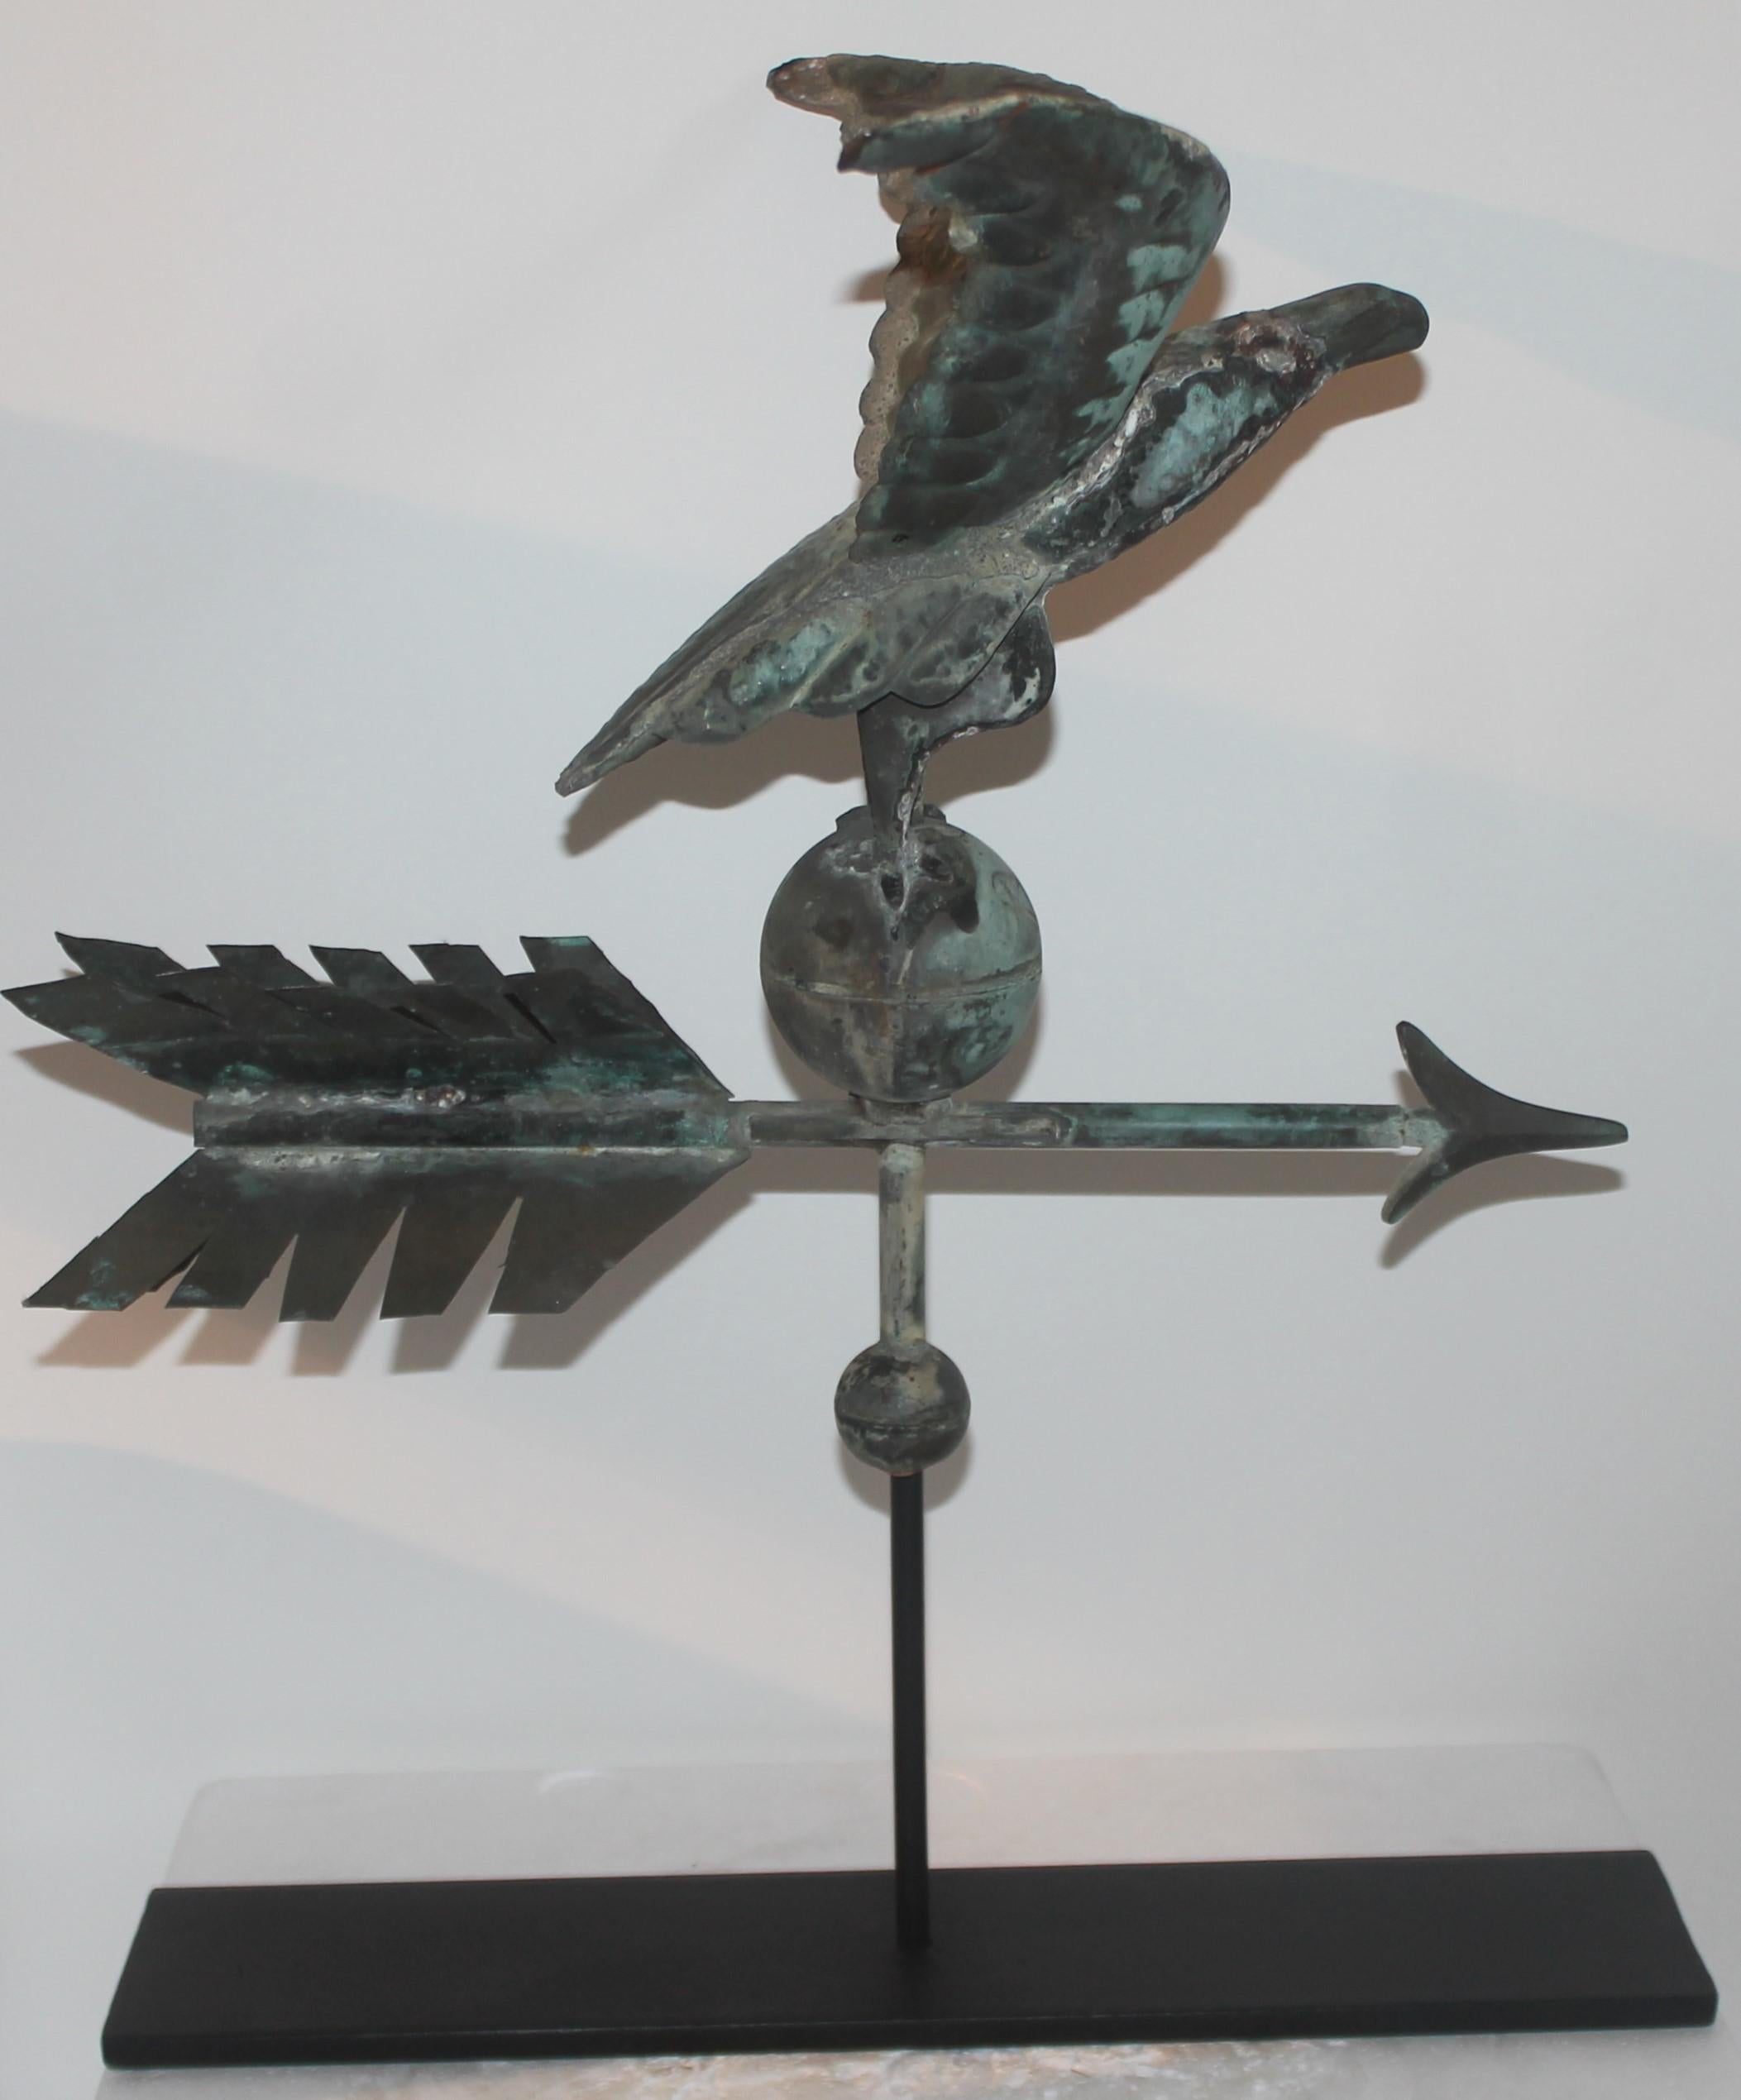 This amazing small-scale rare 19th century eagle weather vane sits on top of the unusual arrow in a verdigris copper patina. The nose is in zinc and so is the tip of the arrow. This vane sits on a custom-made iron stand. Great addition to any Folk